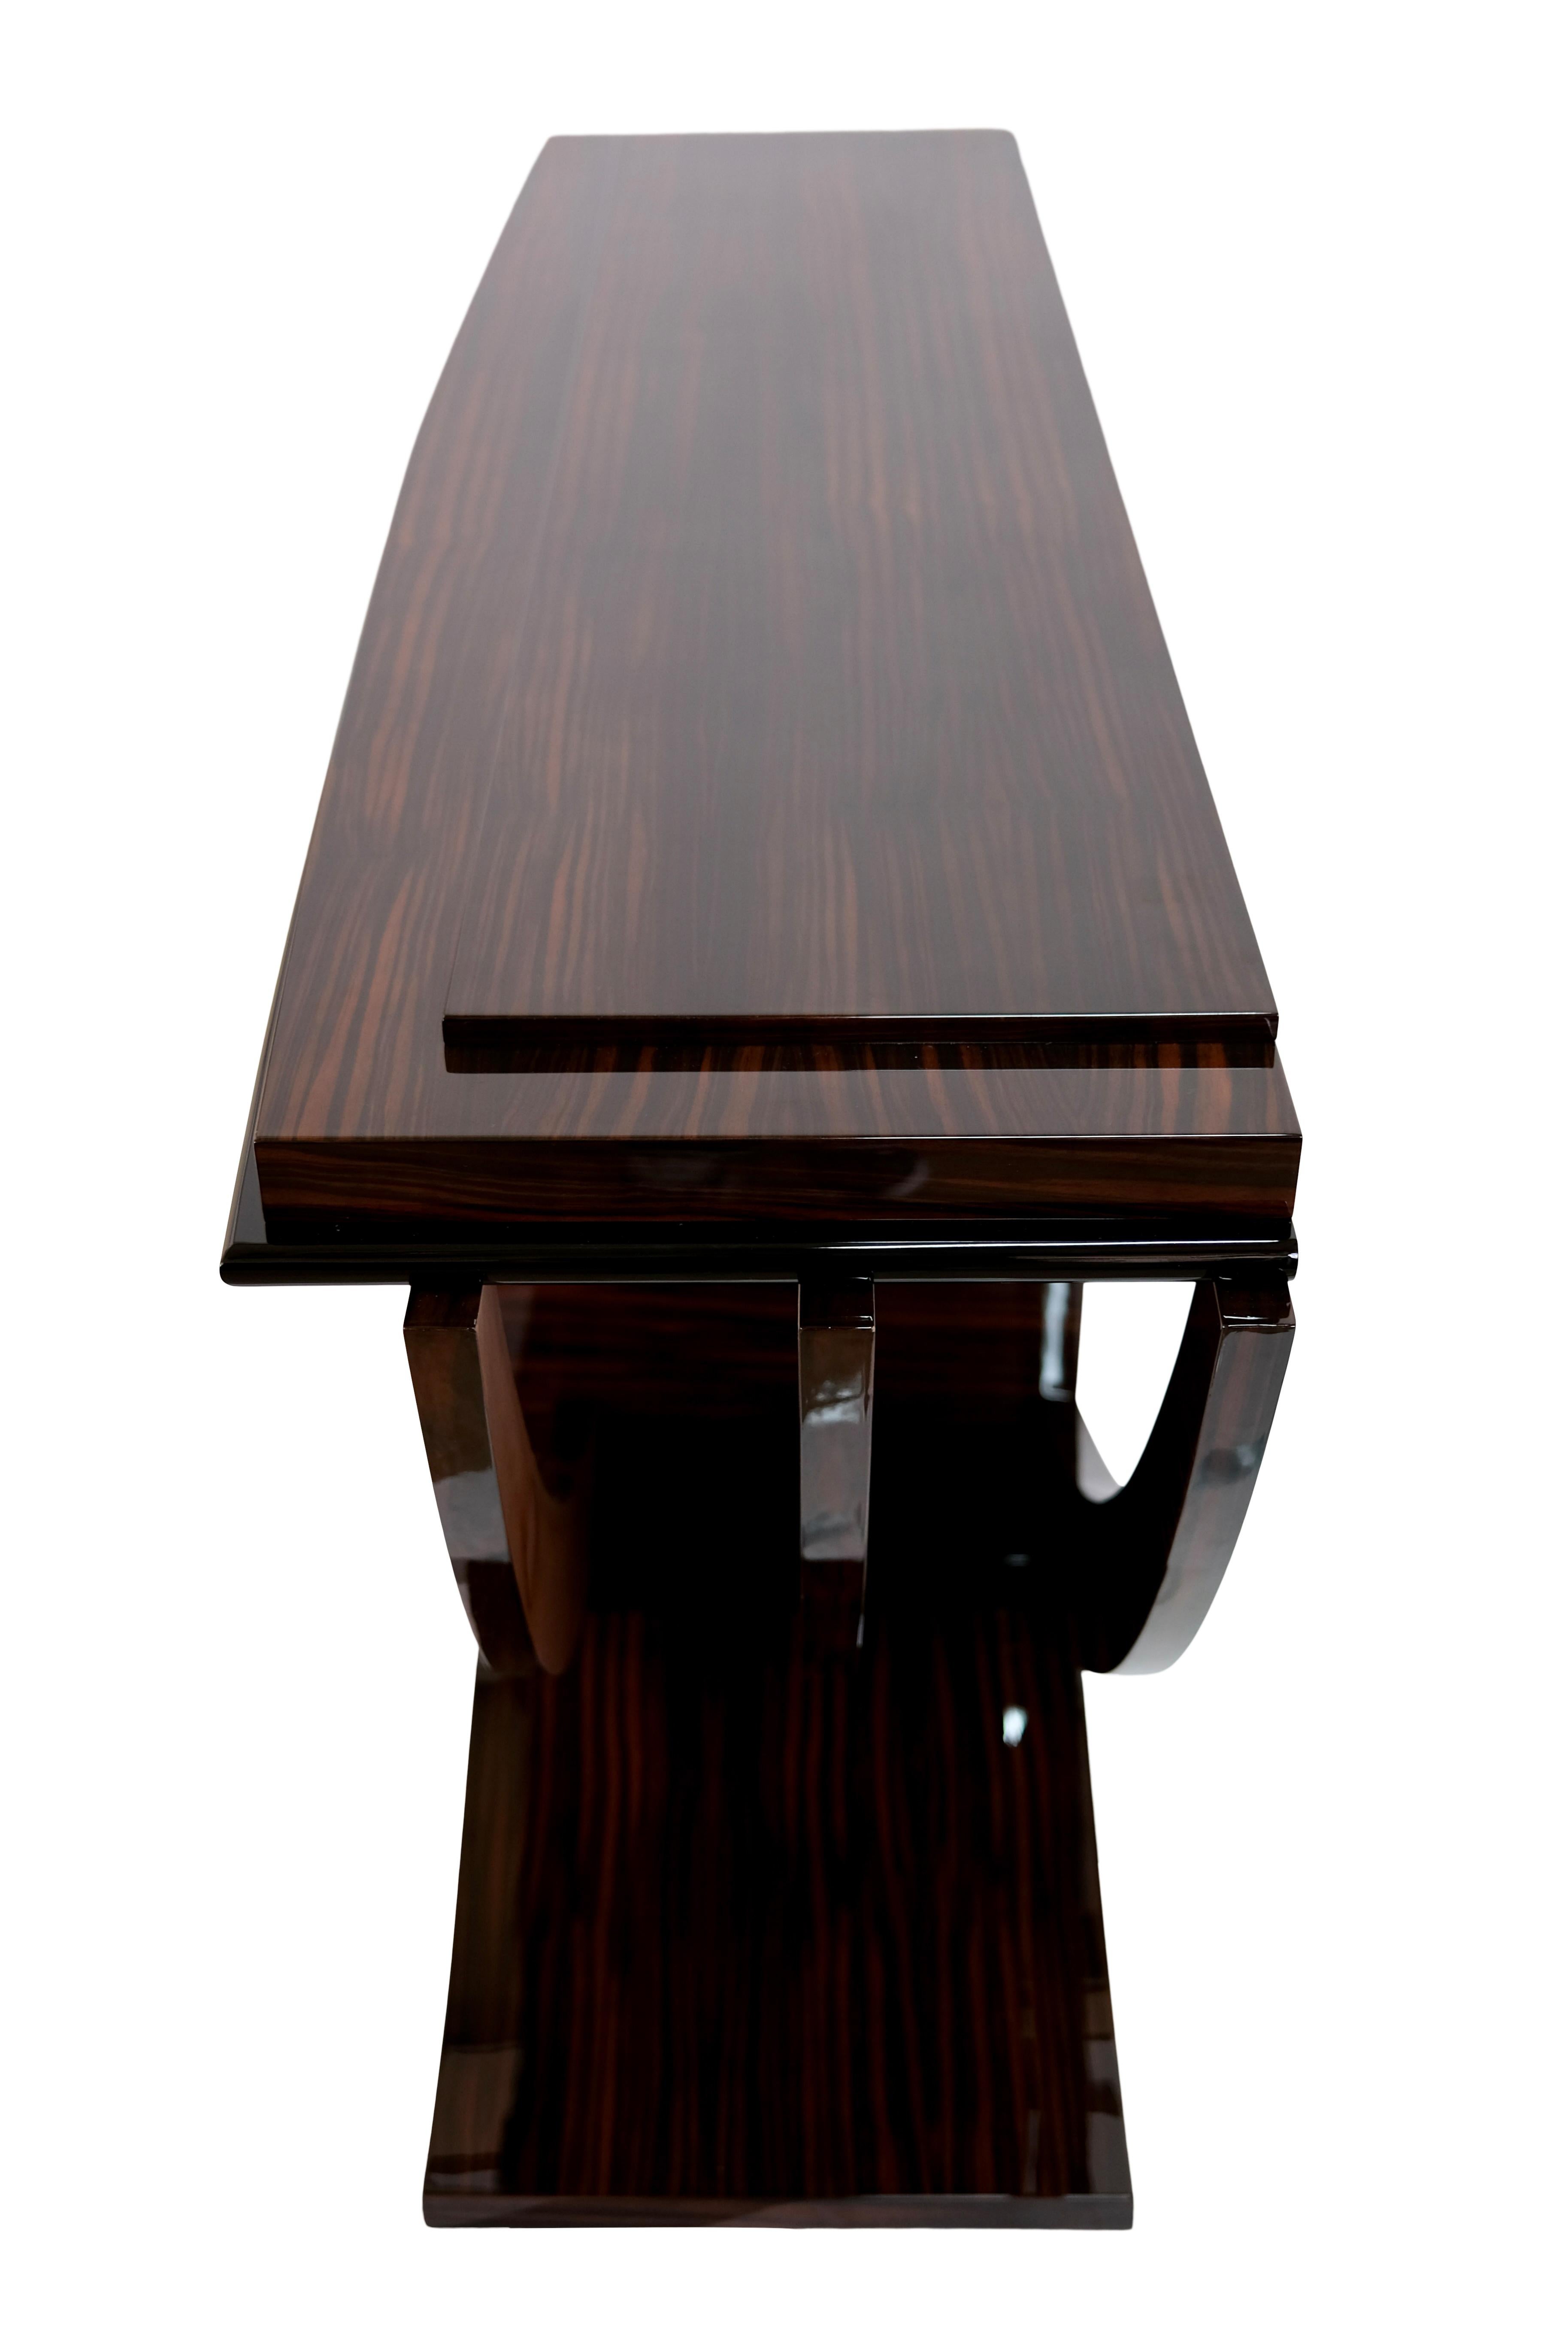 Wood Art Deco Style Console Table with Macassar Veneer in High Gloss Lacquer For Sale